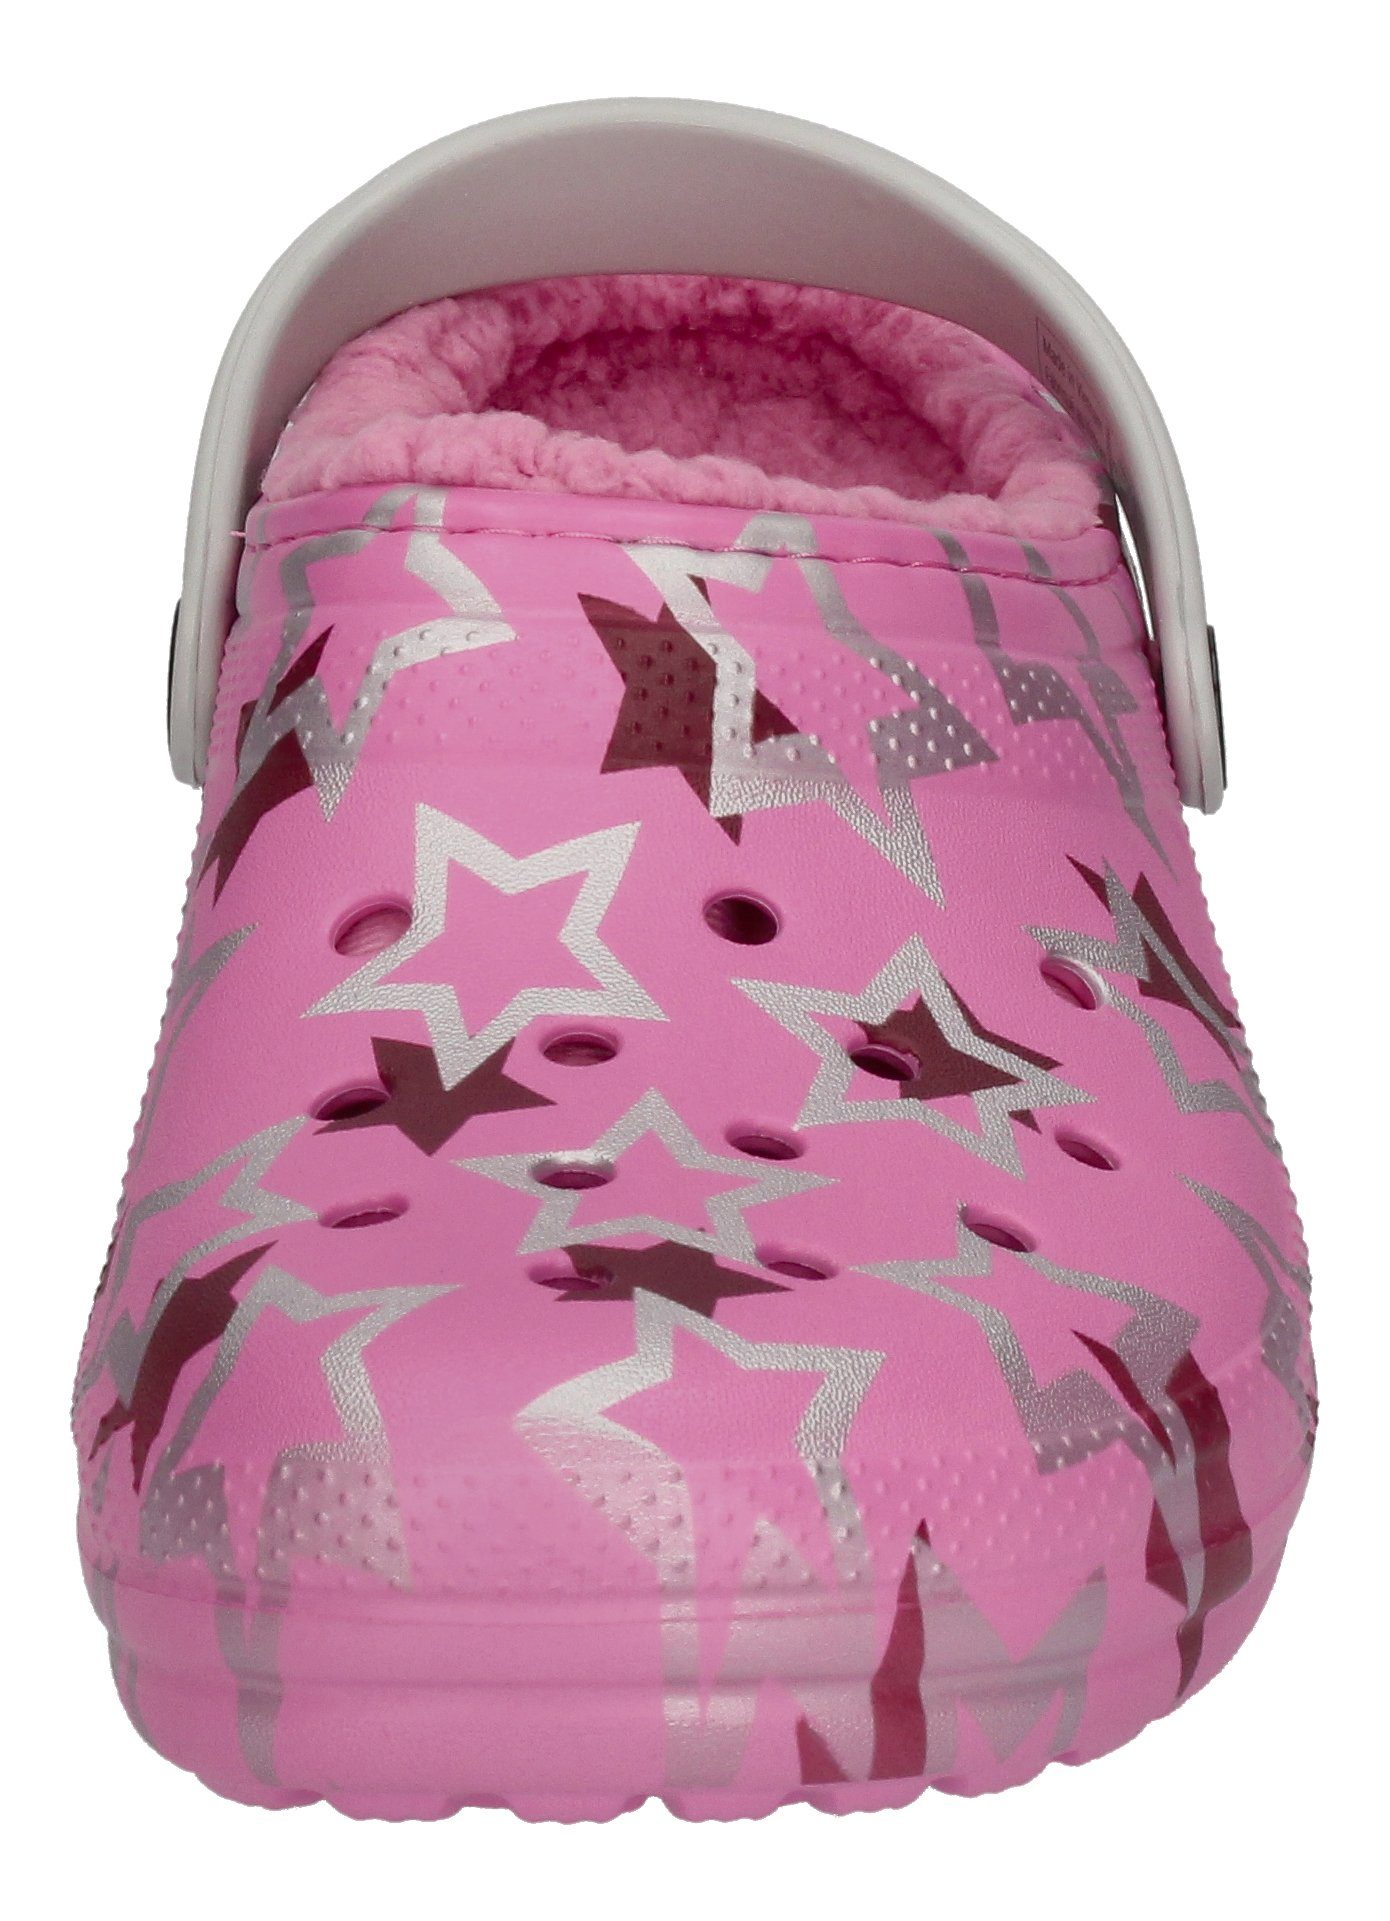 Crocs CLASSIC LINED DISCO Hausschuh PARTY Taffy DANCE Pink KIDS Multi CLOG